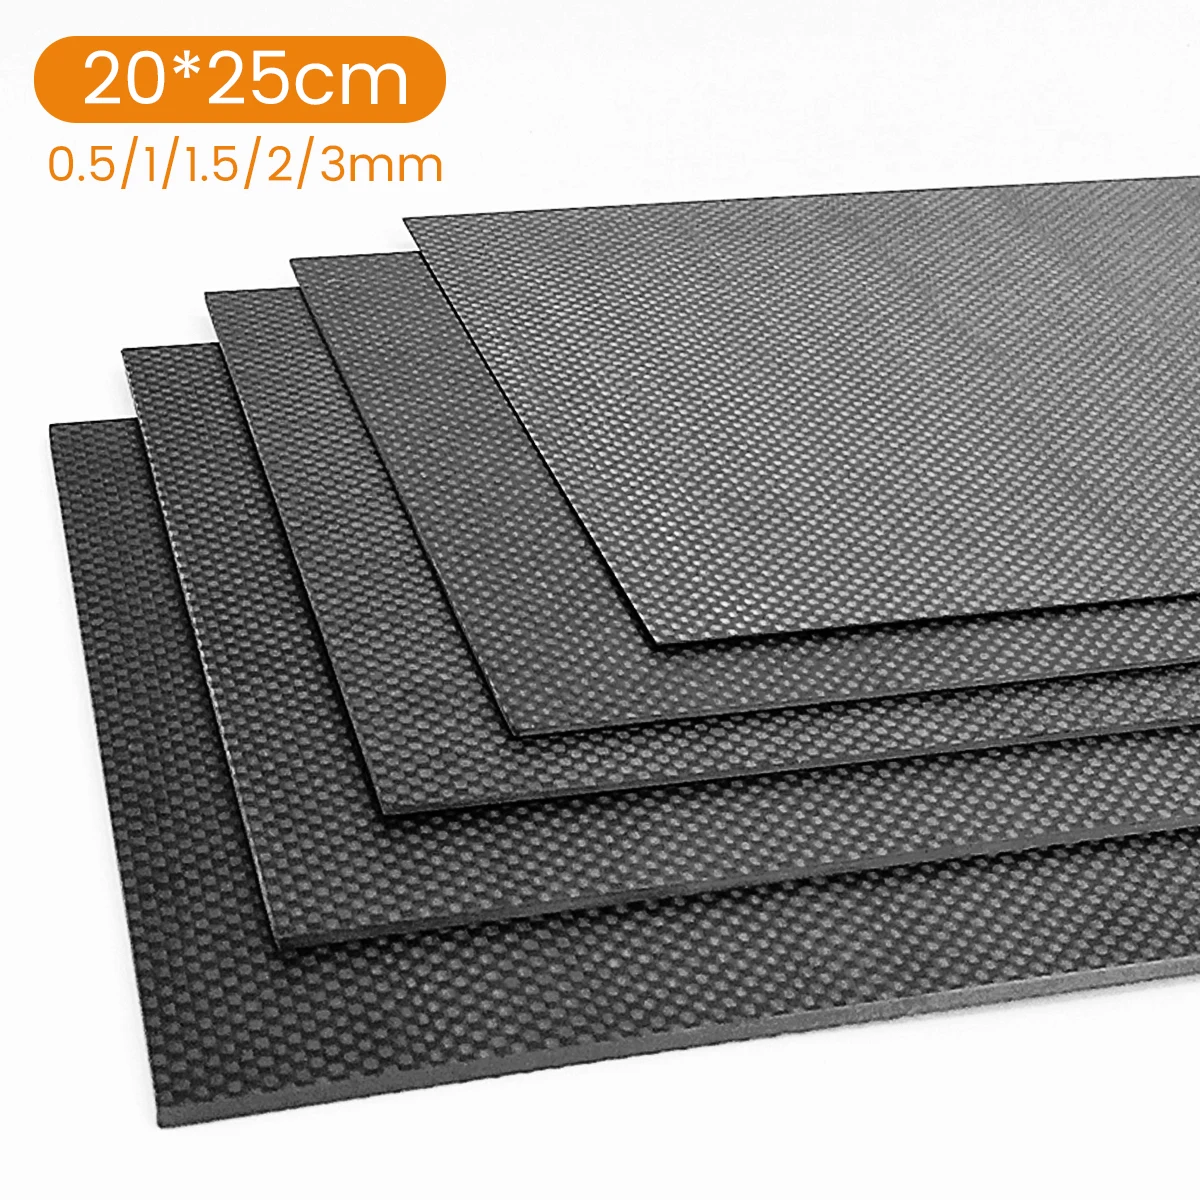 200mmx250mm Carbon Fiber Plate Panel Sheets 0.5mm 1mm 1.5mm 2mm 3mm thickness Composite Hardness Material for RC Car Helicopter